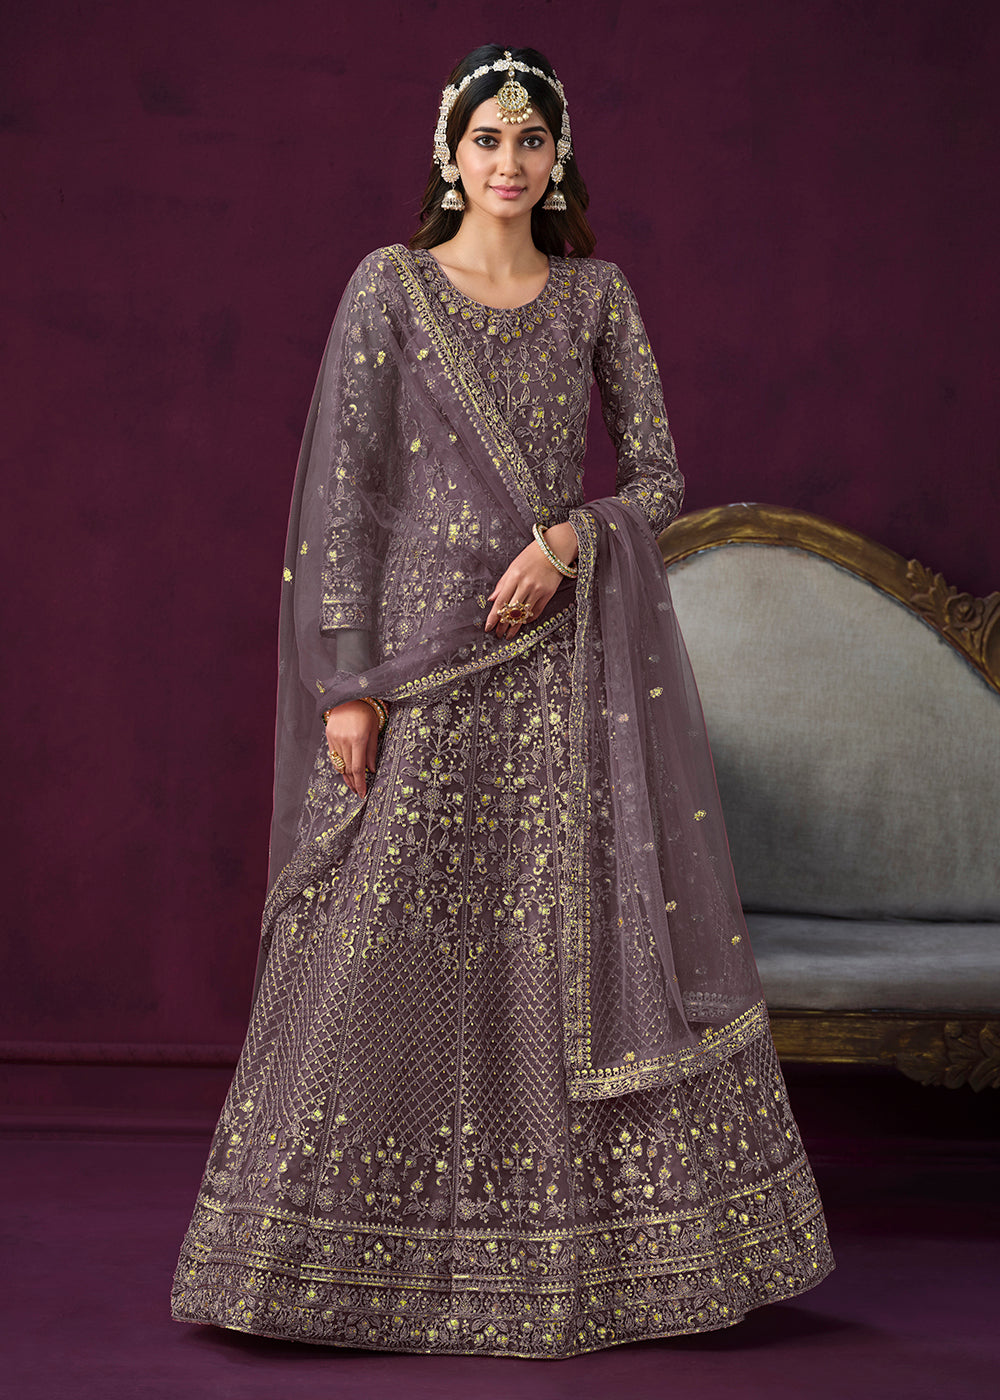 Buy Now Charming Purple Embroidered Net Floor Length Anarkali Suit Online in USA, UK, Australia, New Zealand, Canada & Worldwide at Empress Clothing.